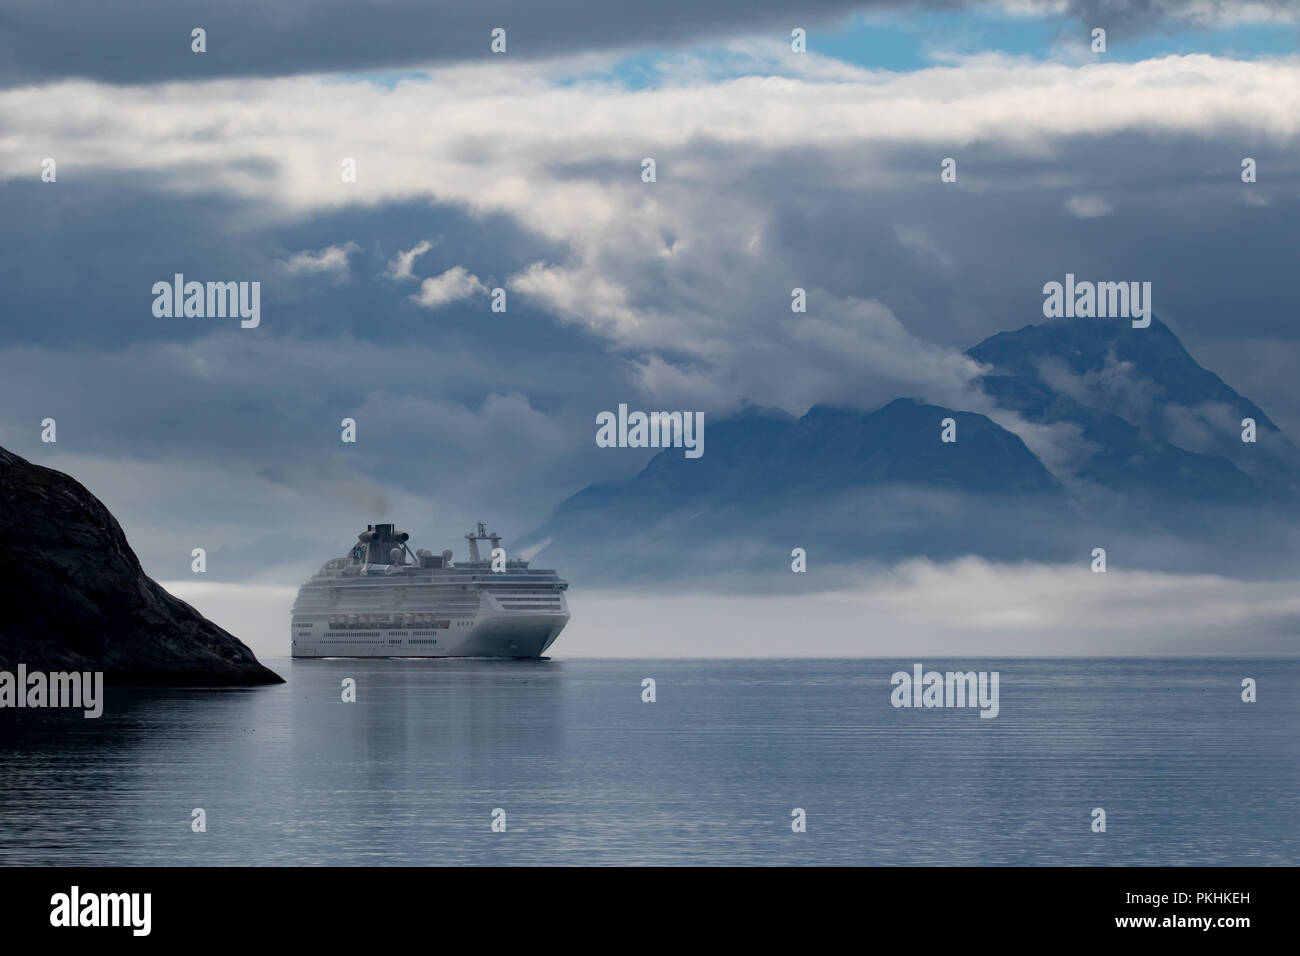 The cruise ship the Coral Princess of Princess cruise lines sails in Glacier Bay National Park in Alaska. Stock Photo